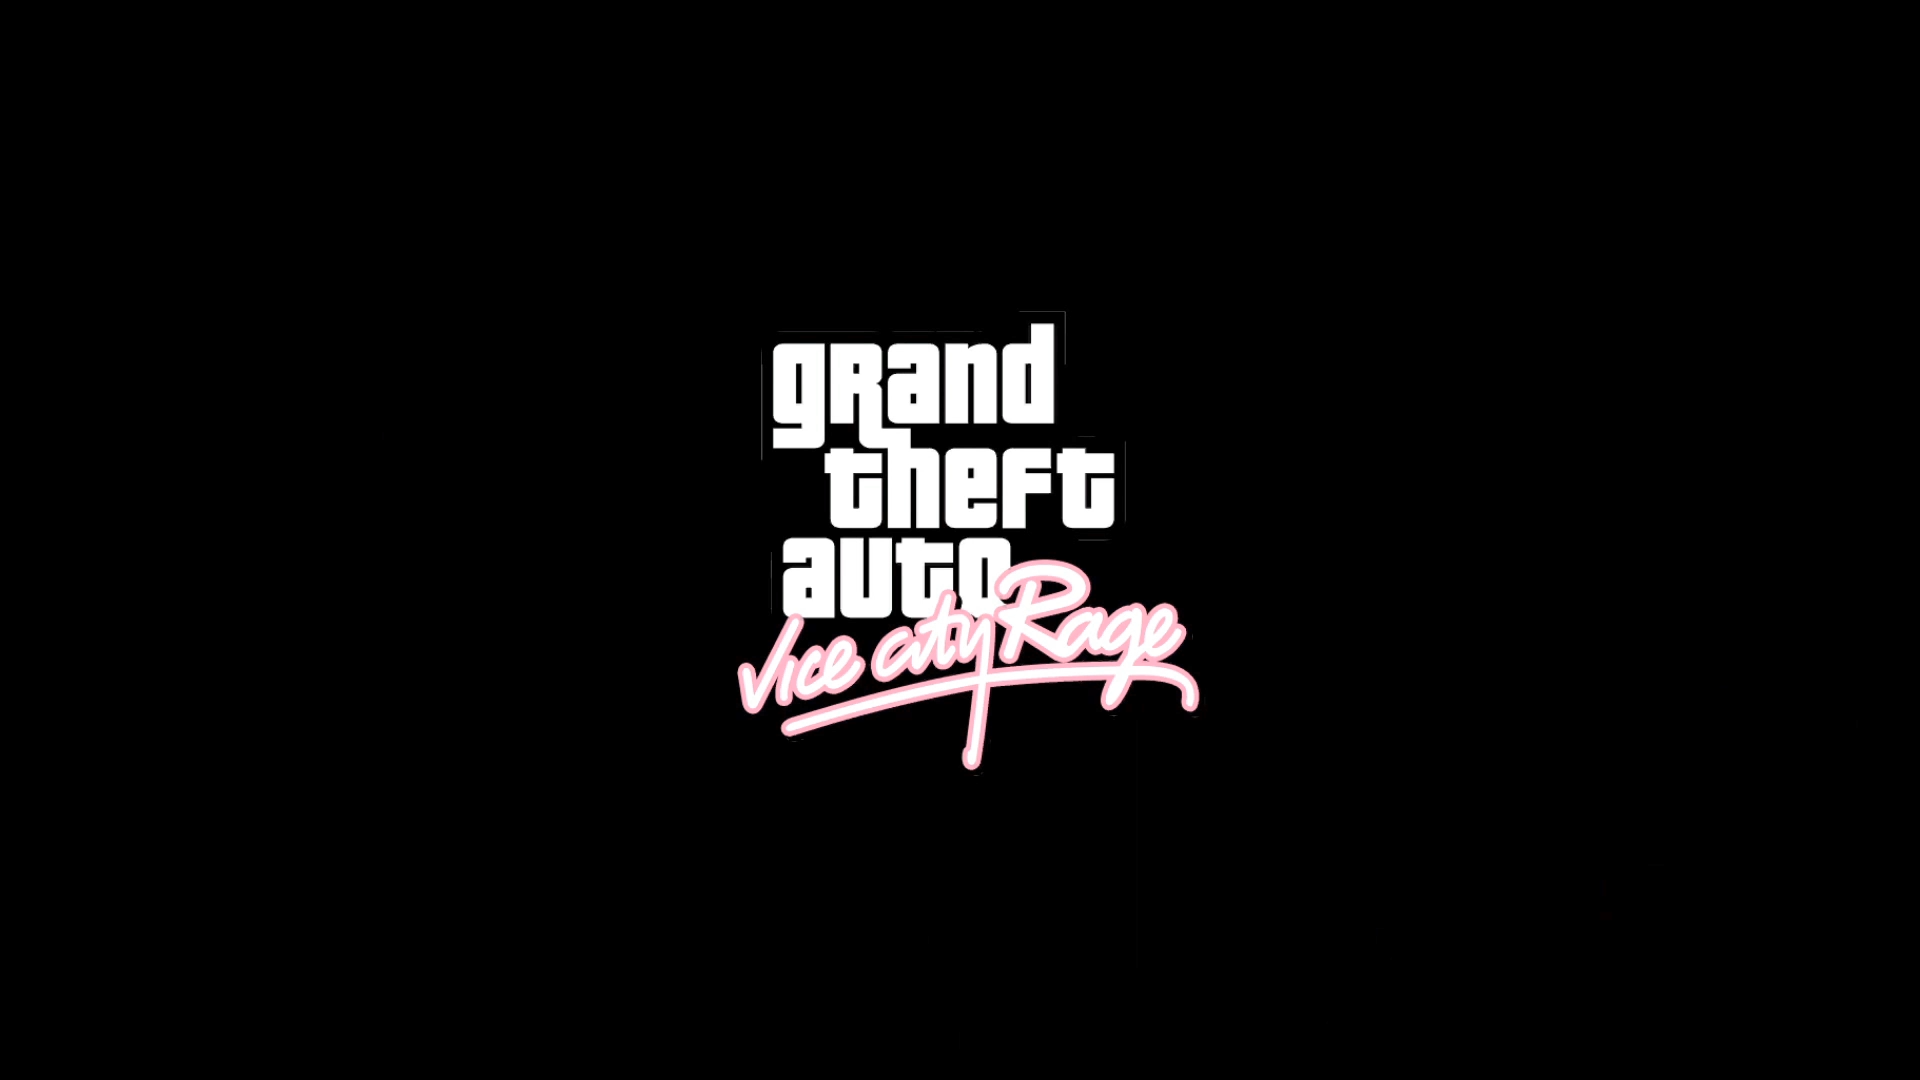 Grand Theft Auto: Vice City Cheats & Trainers for PC